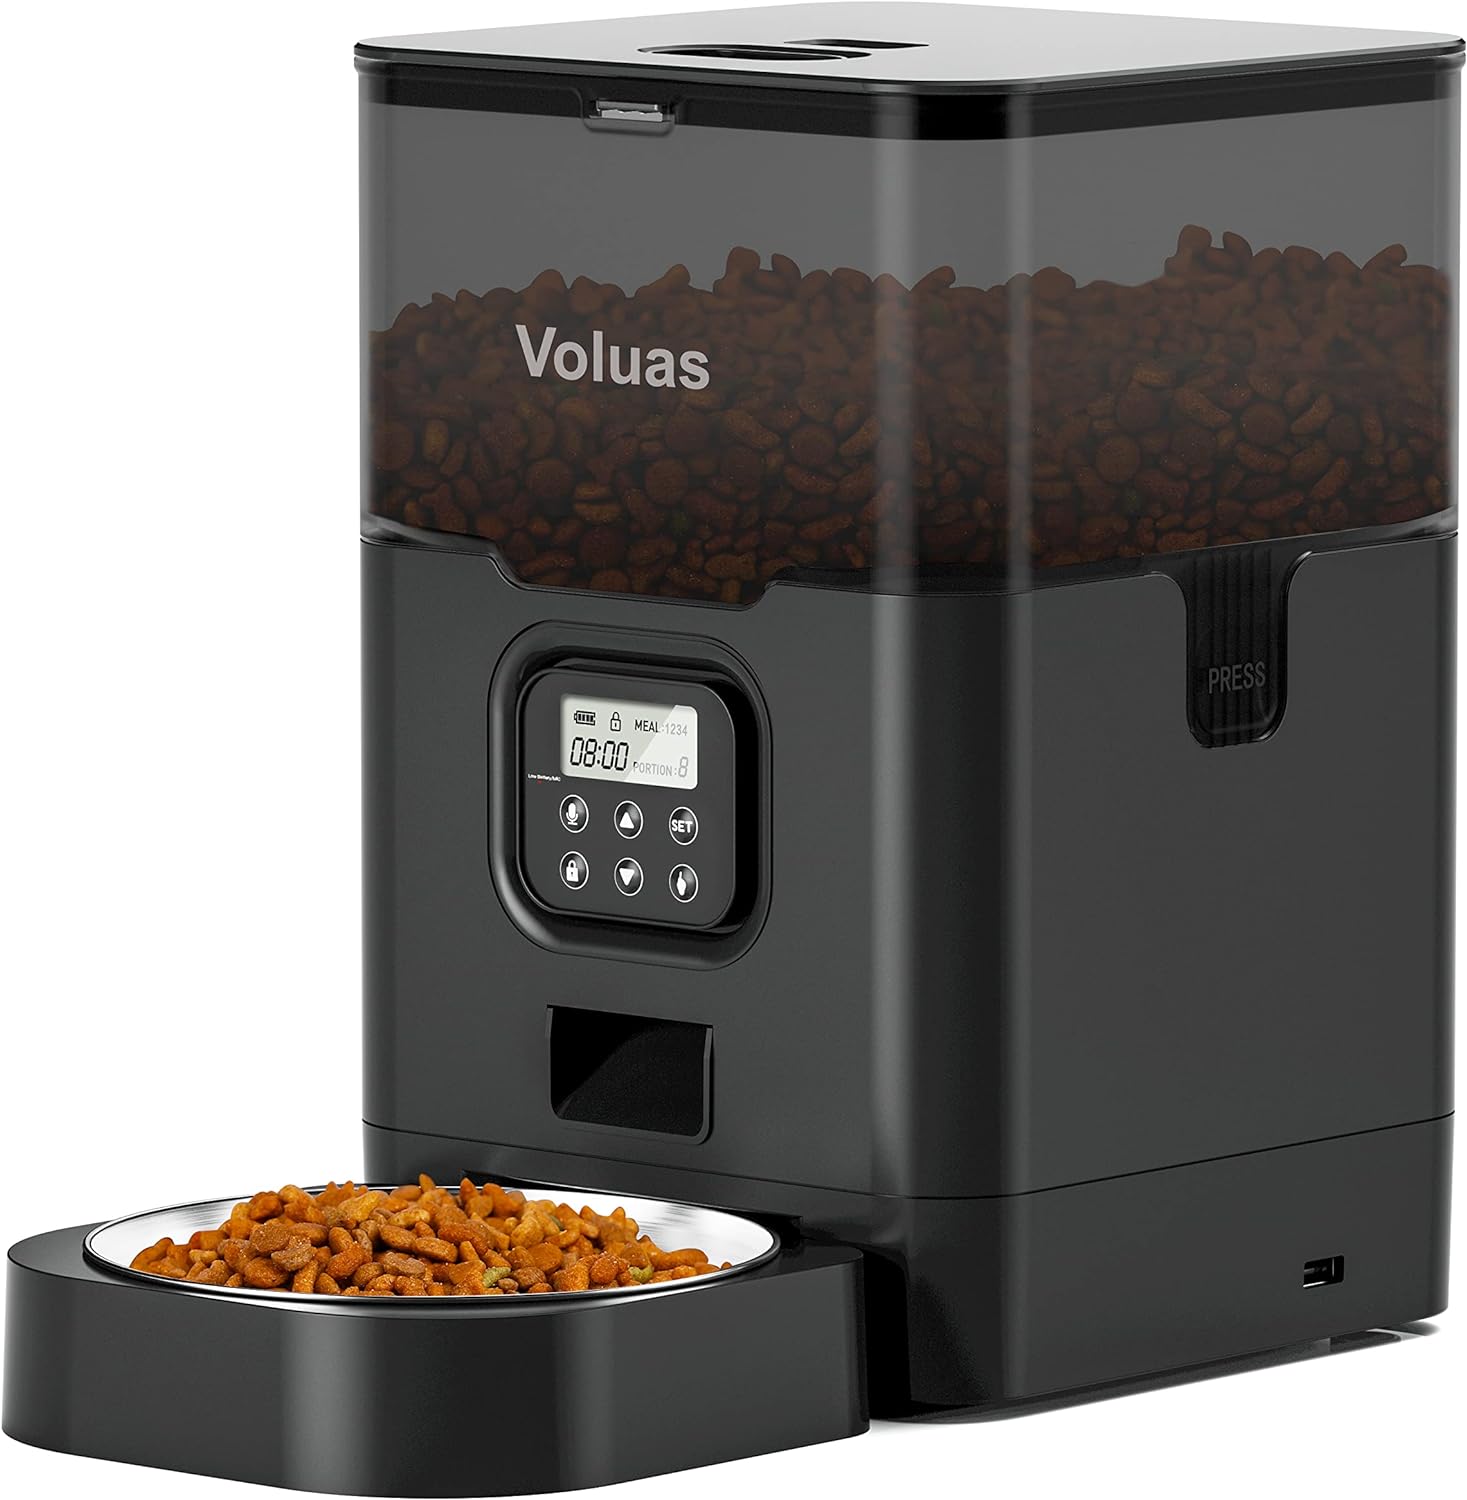 Unlock Savings on VOLUAS Cat Dry Food Dispenser with Timer - Exclusive Promo!